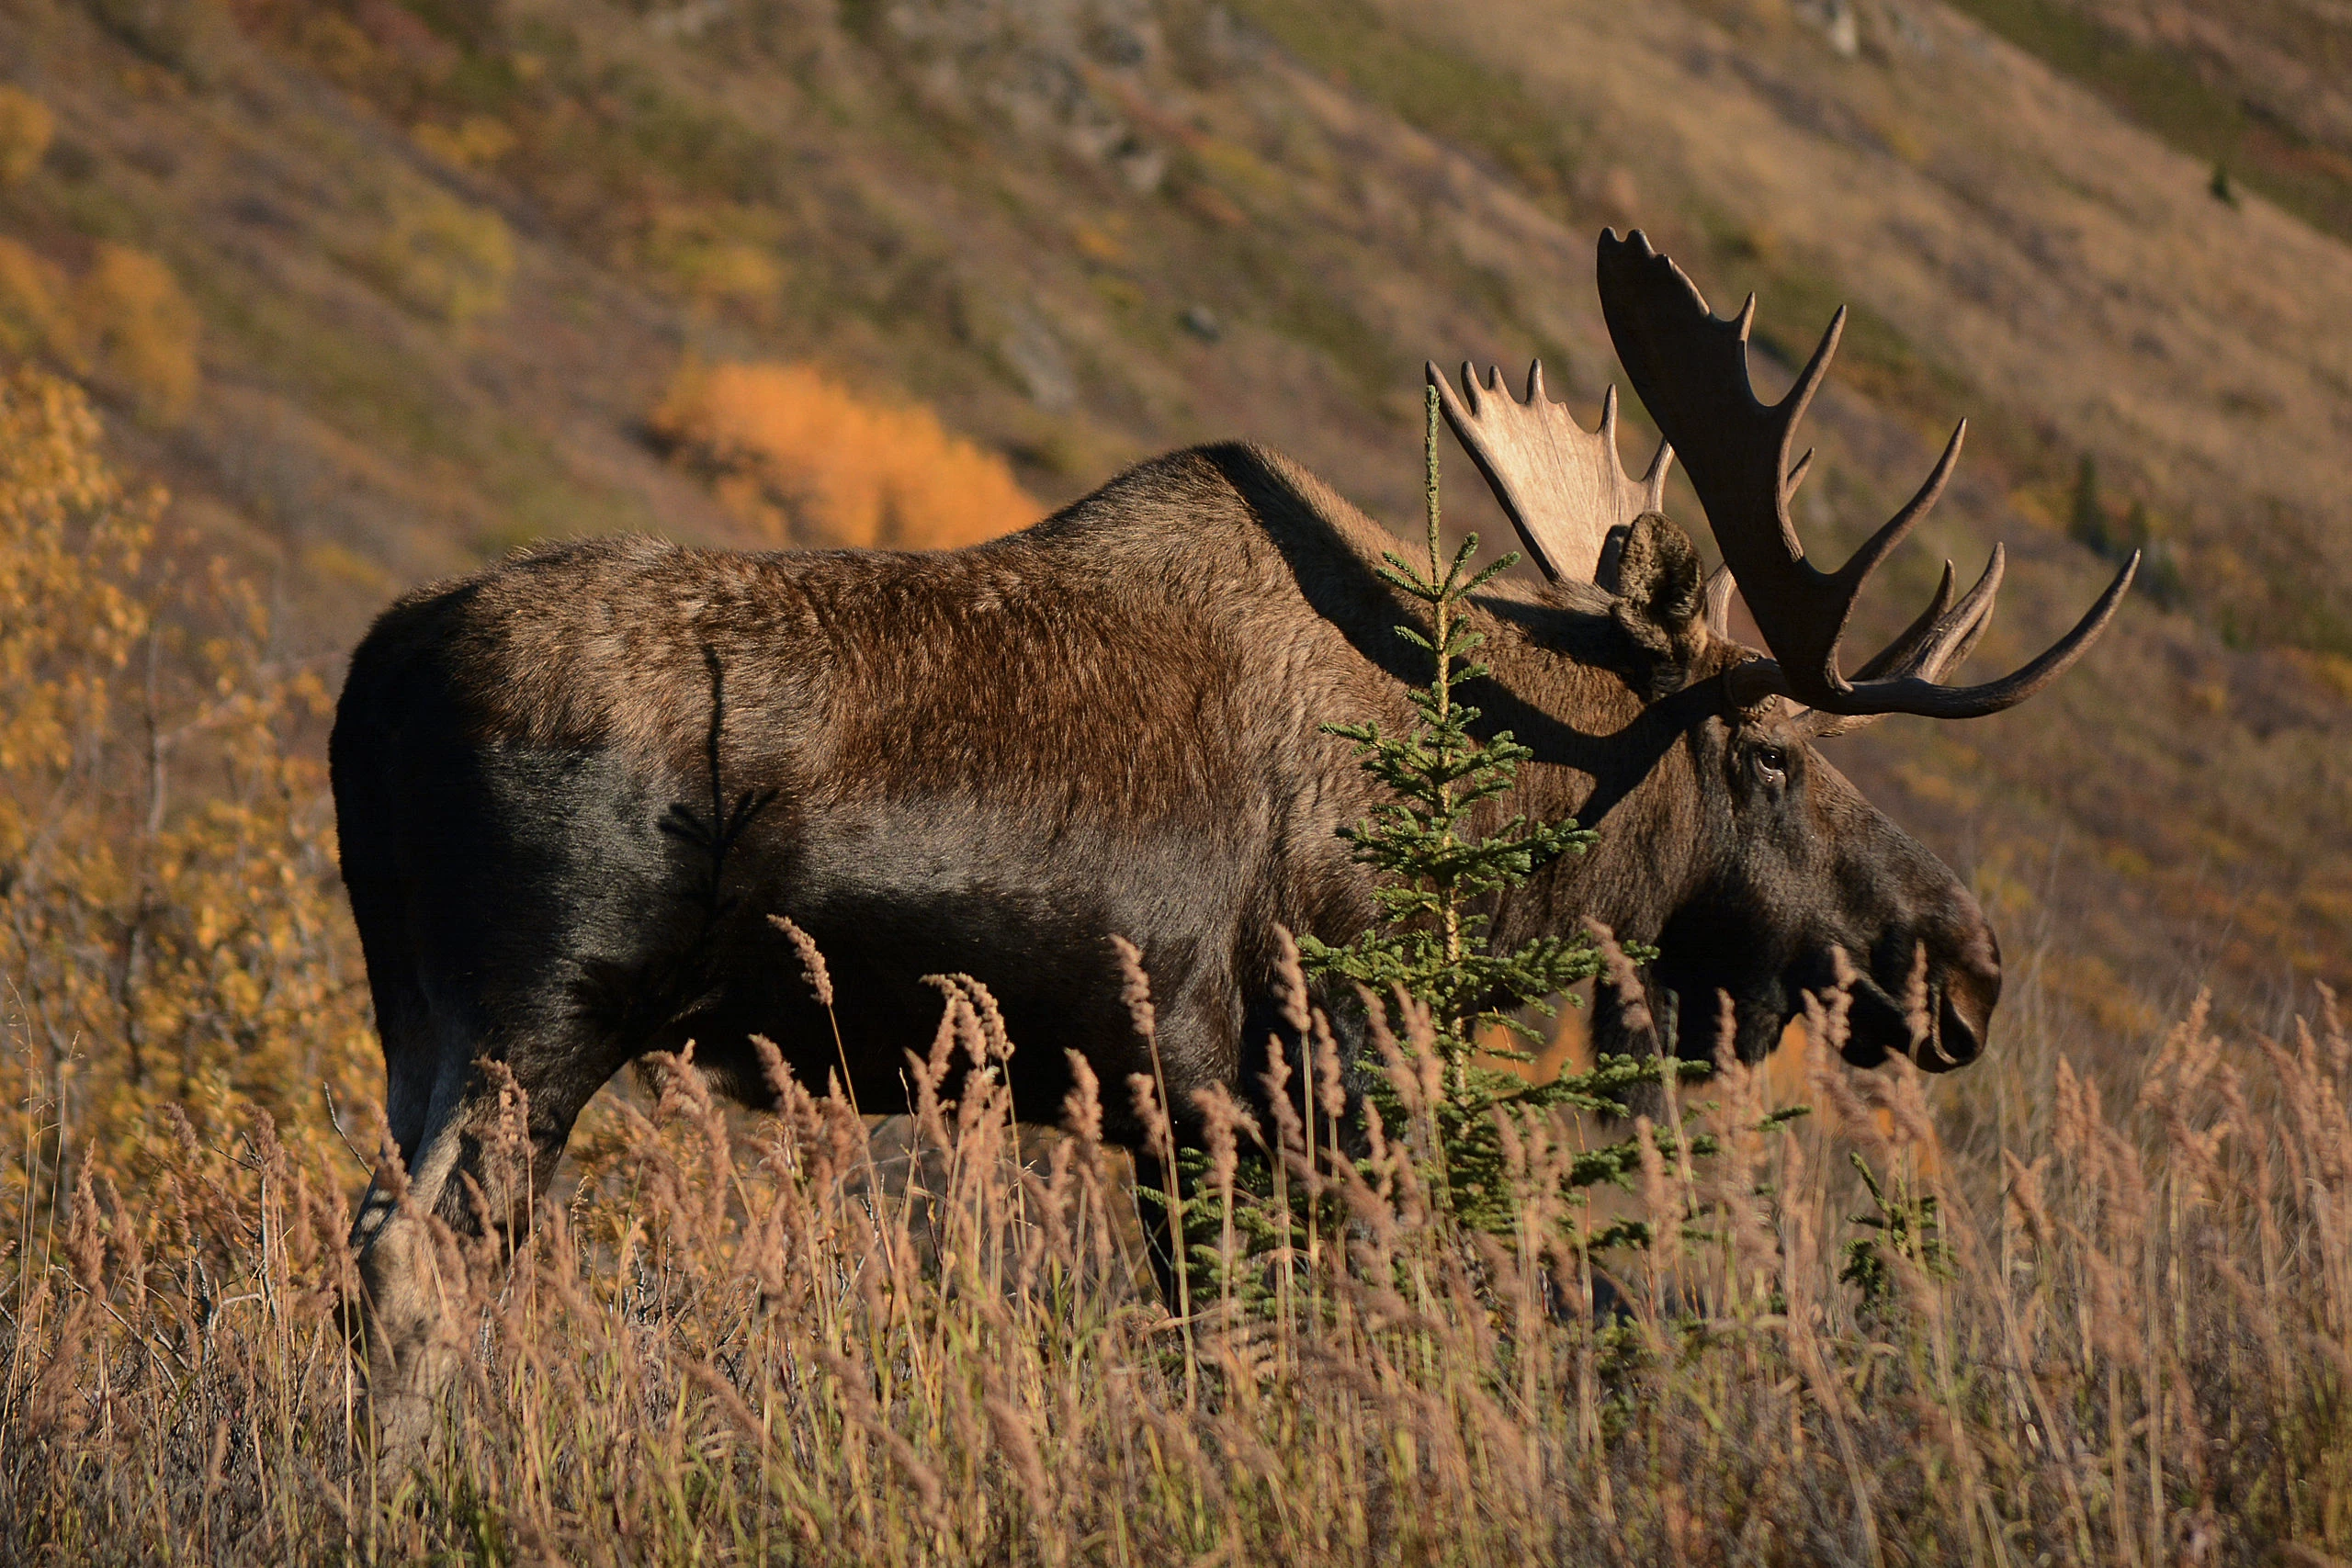 A bull moose in South Fork Eagle River, Alaska. By Paxson Woelber.